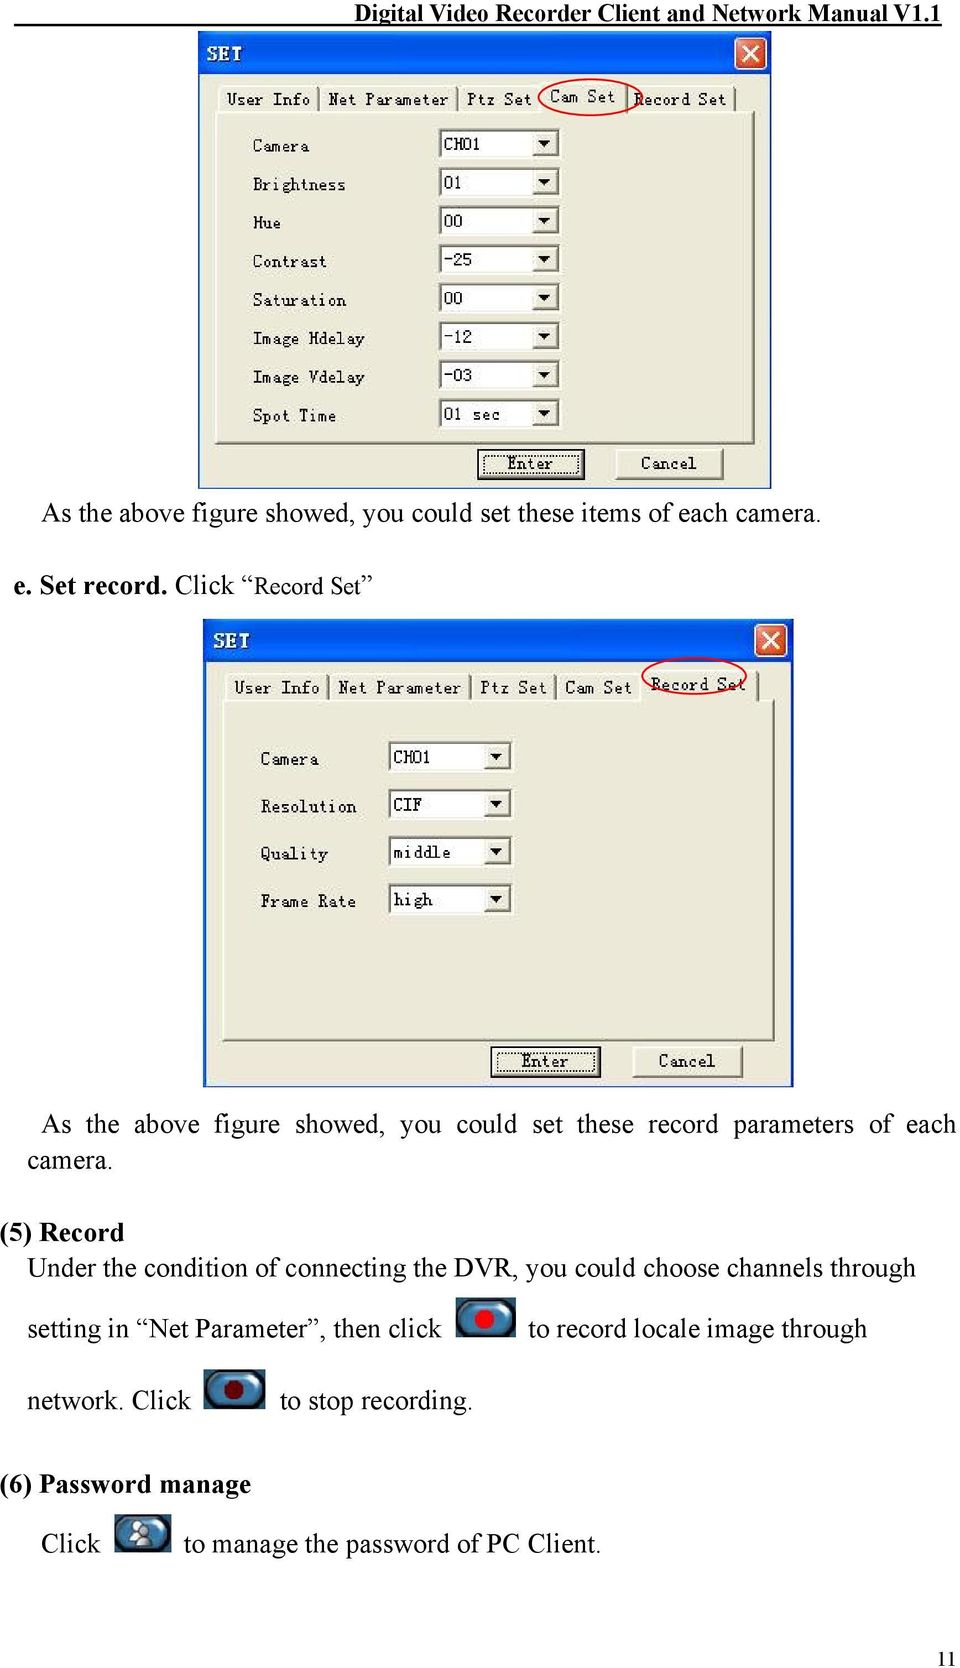 (5) Record Under the condition of connecting the DVR, you could choose channels through setting in Net